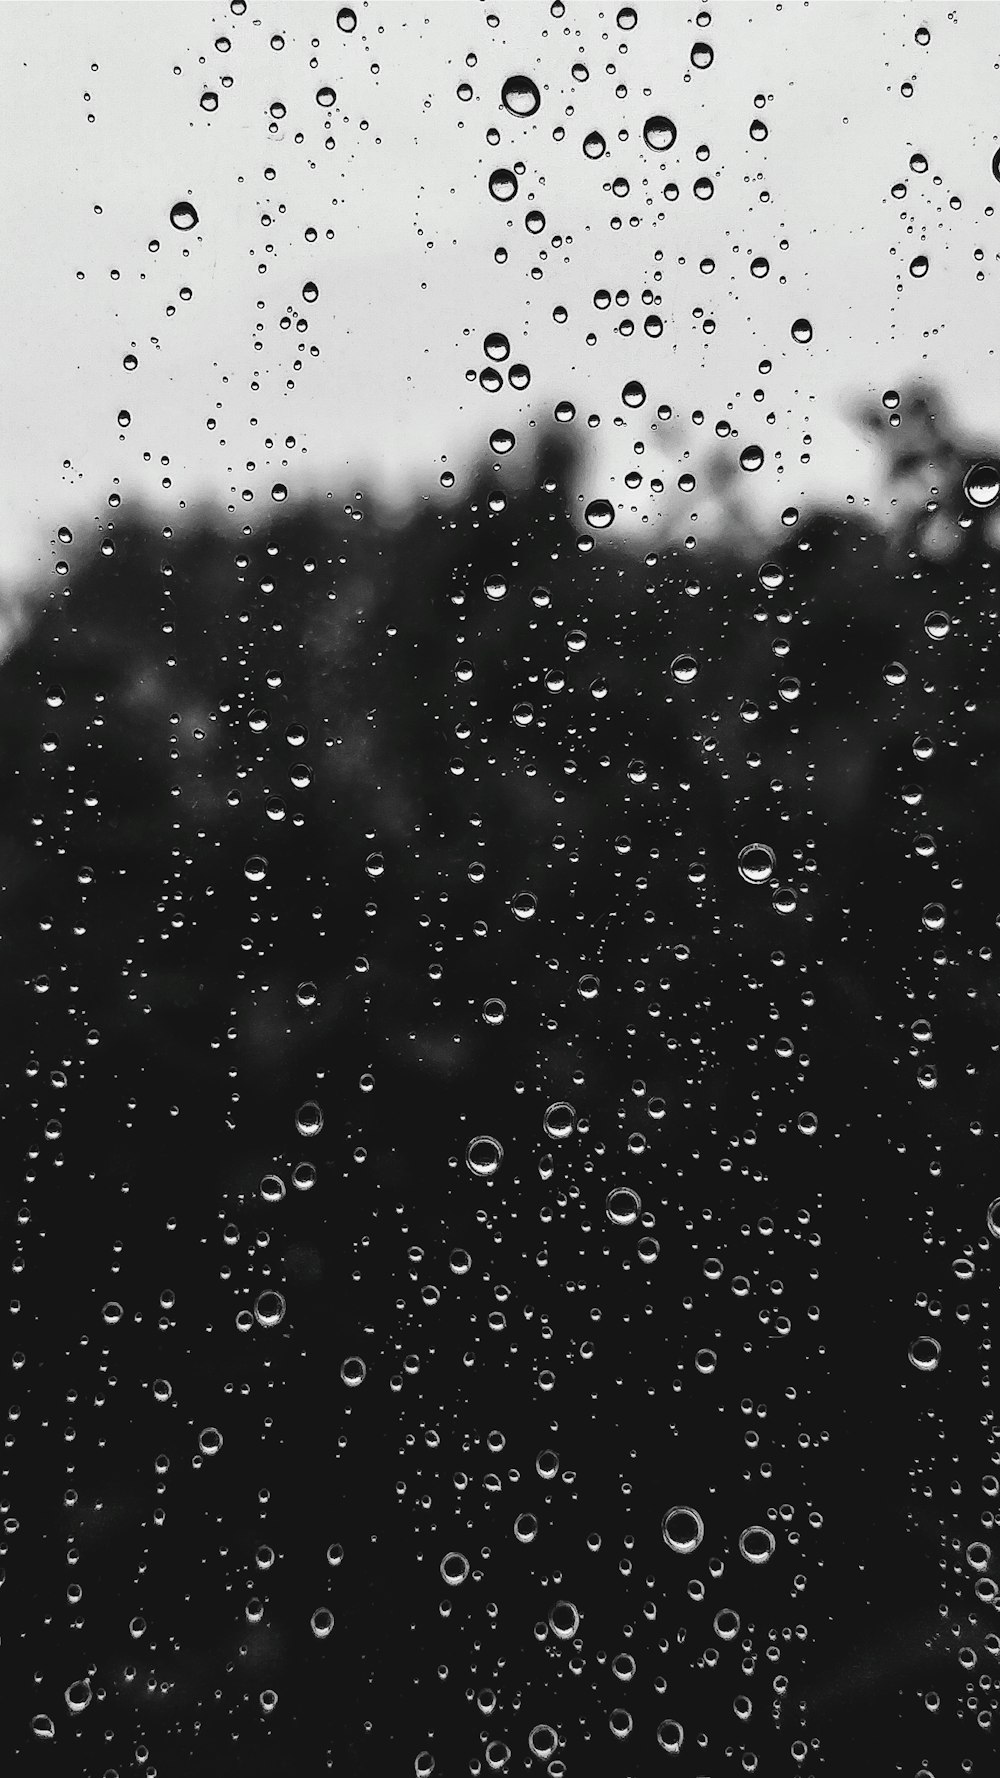 30,000+ Black And White Rain Pictures | Download Free Images on ...